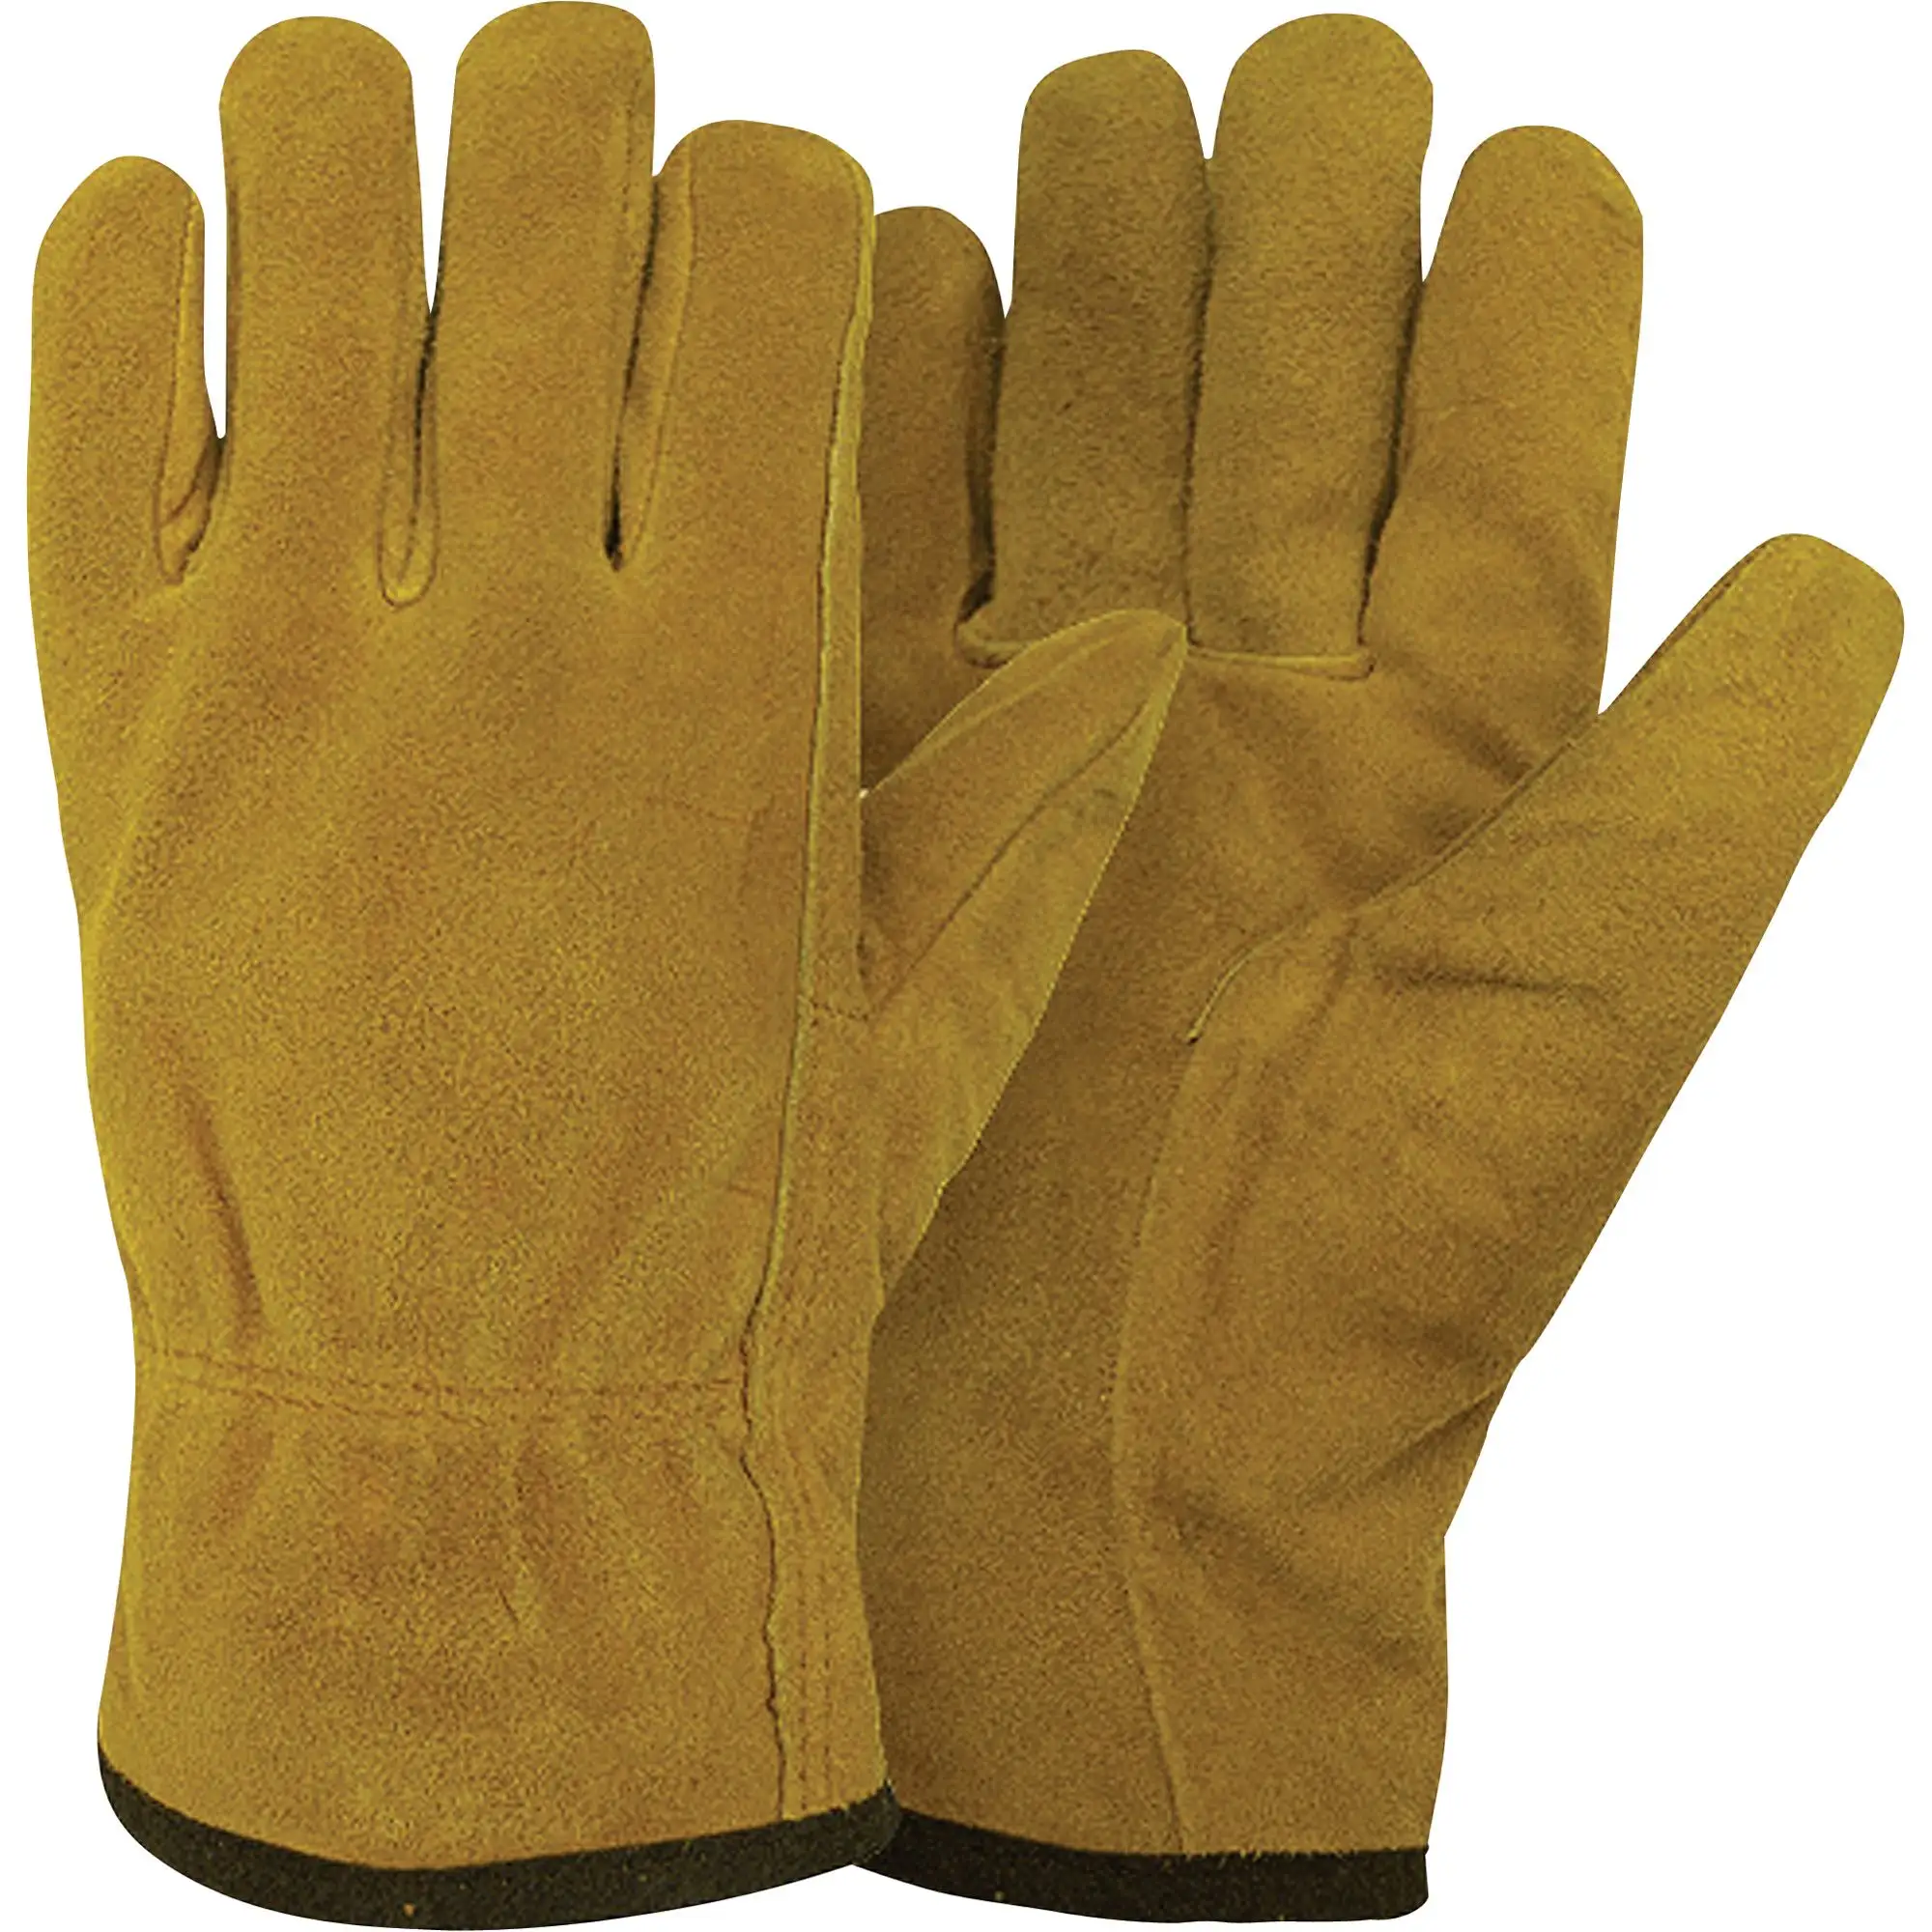 Cowhide leather working gloves leather safety working glove for Driving Work driving gloves